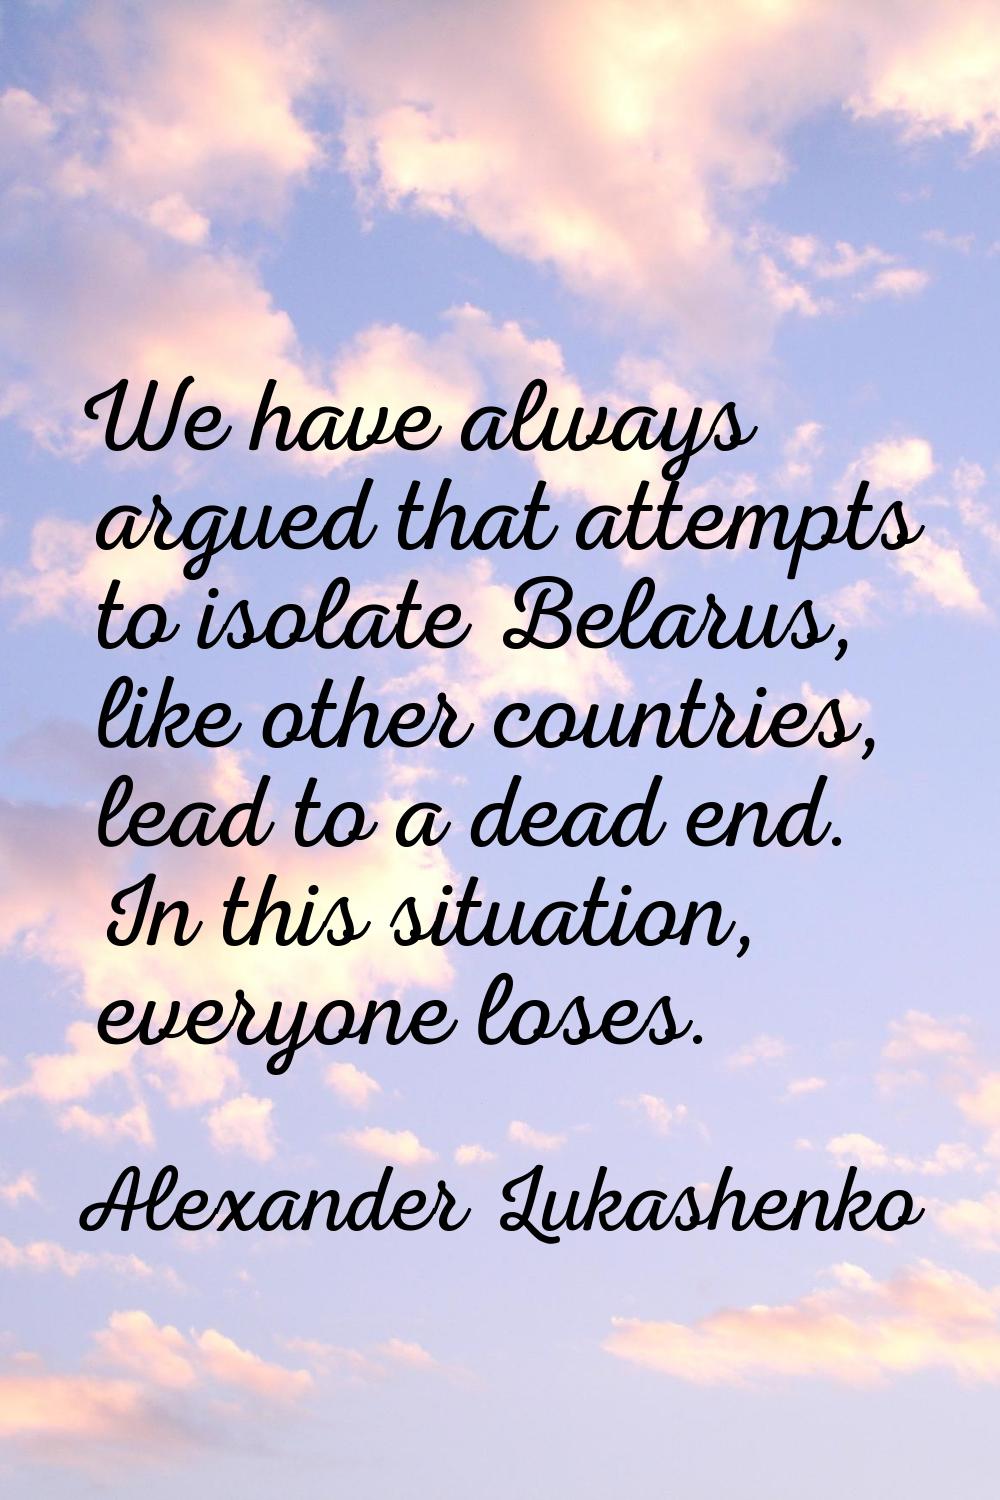 We have always argued that attempts to isolate Belarus, like other countries, lead to a dead end. I